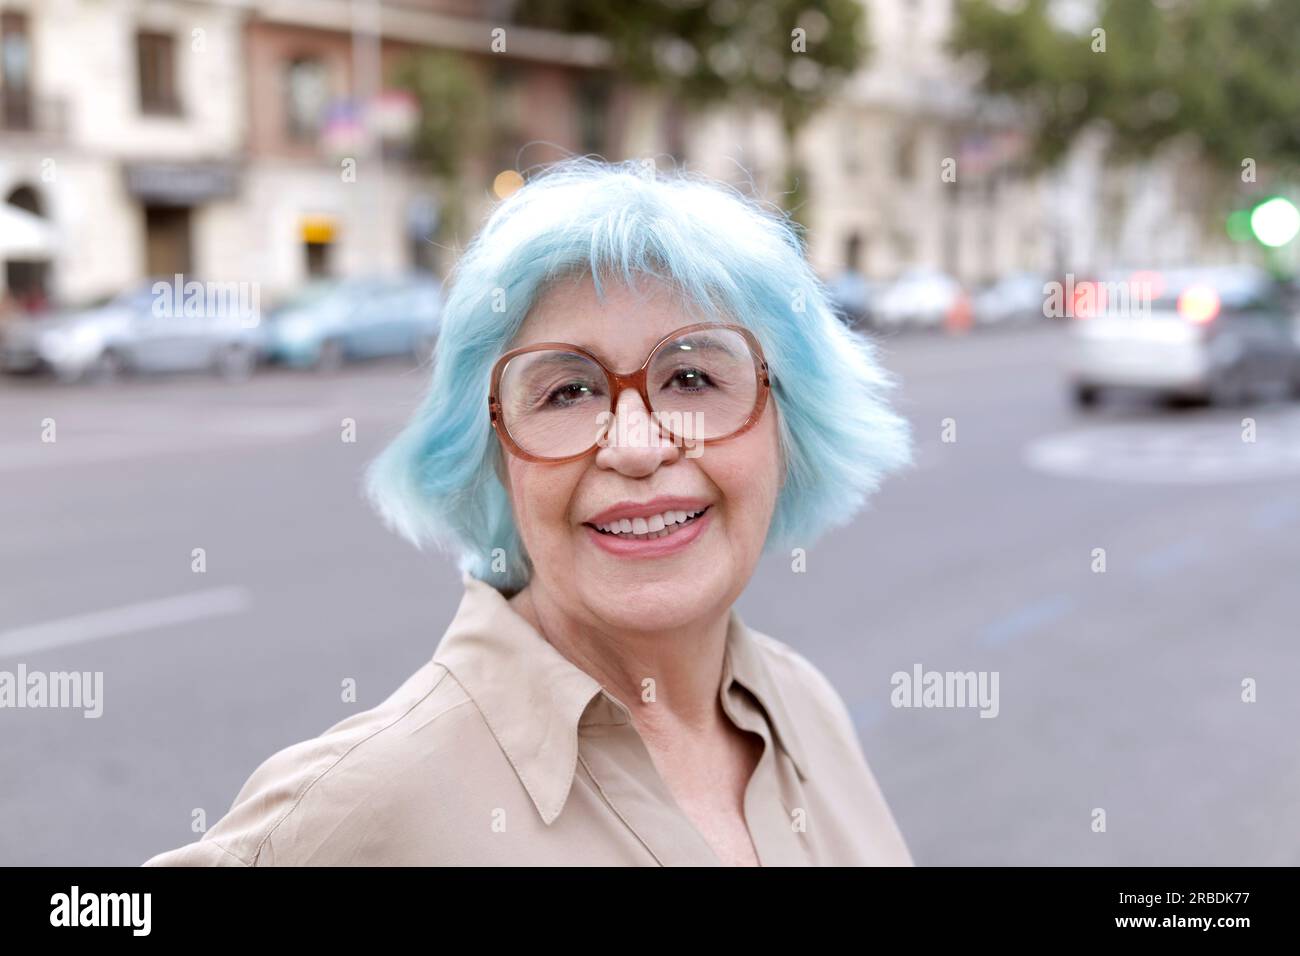 Older blue-haired woman smiling with street in the background Stock Photo